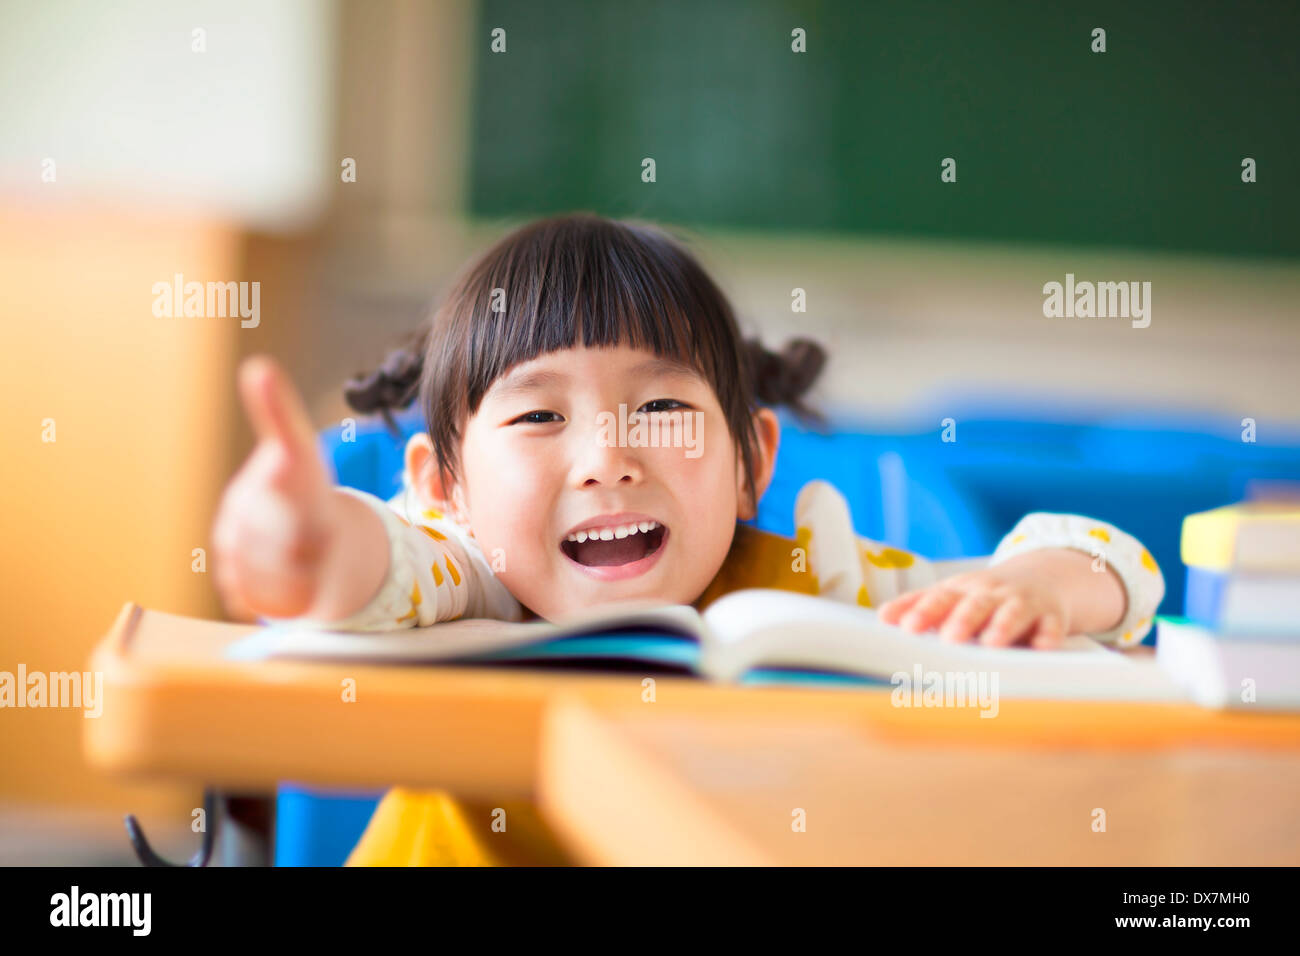 happy kid thumb up with book in a classroom Stock Photo